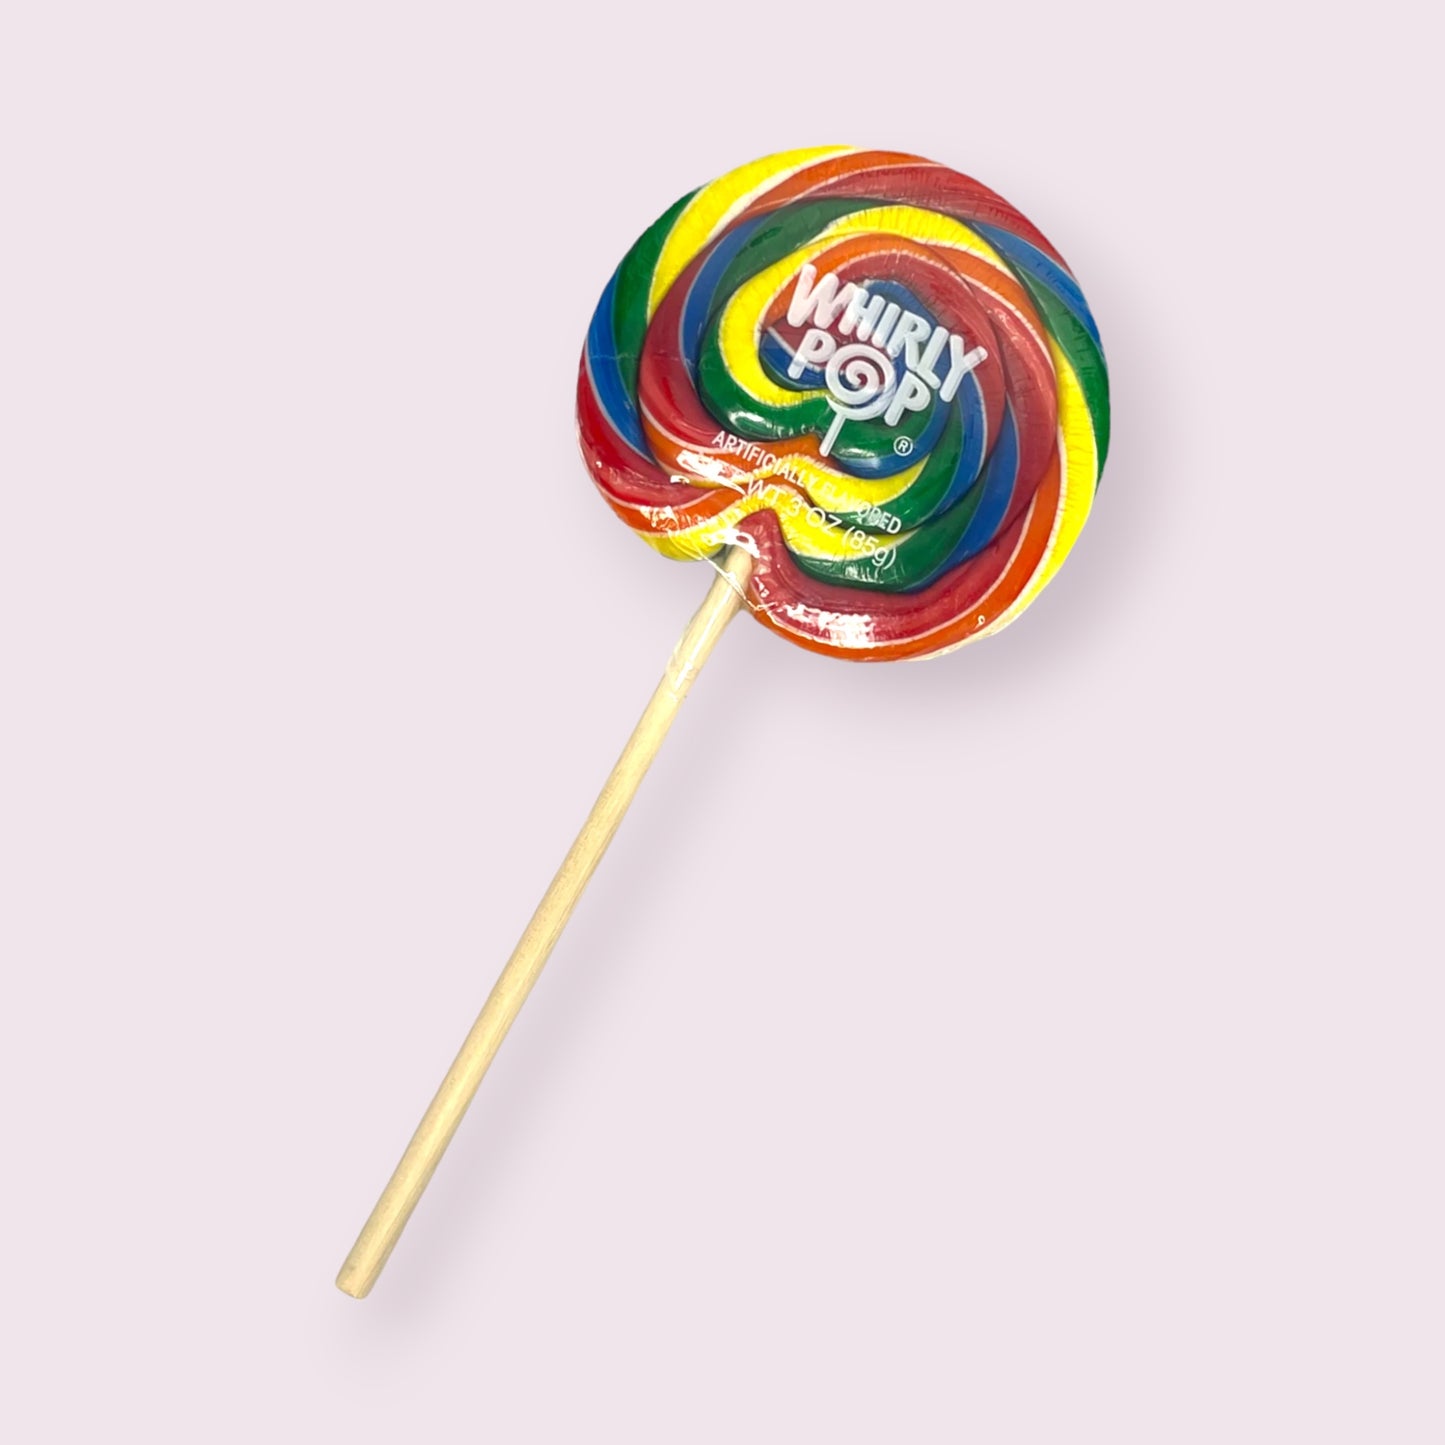 Whirly Pop Medium Candy Pixie Candy Shoppe   